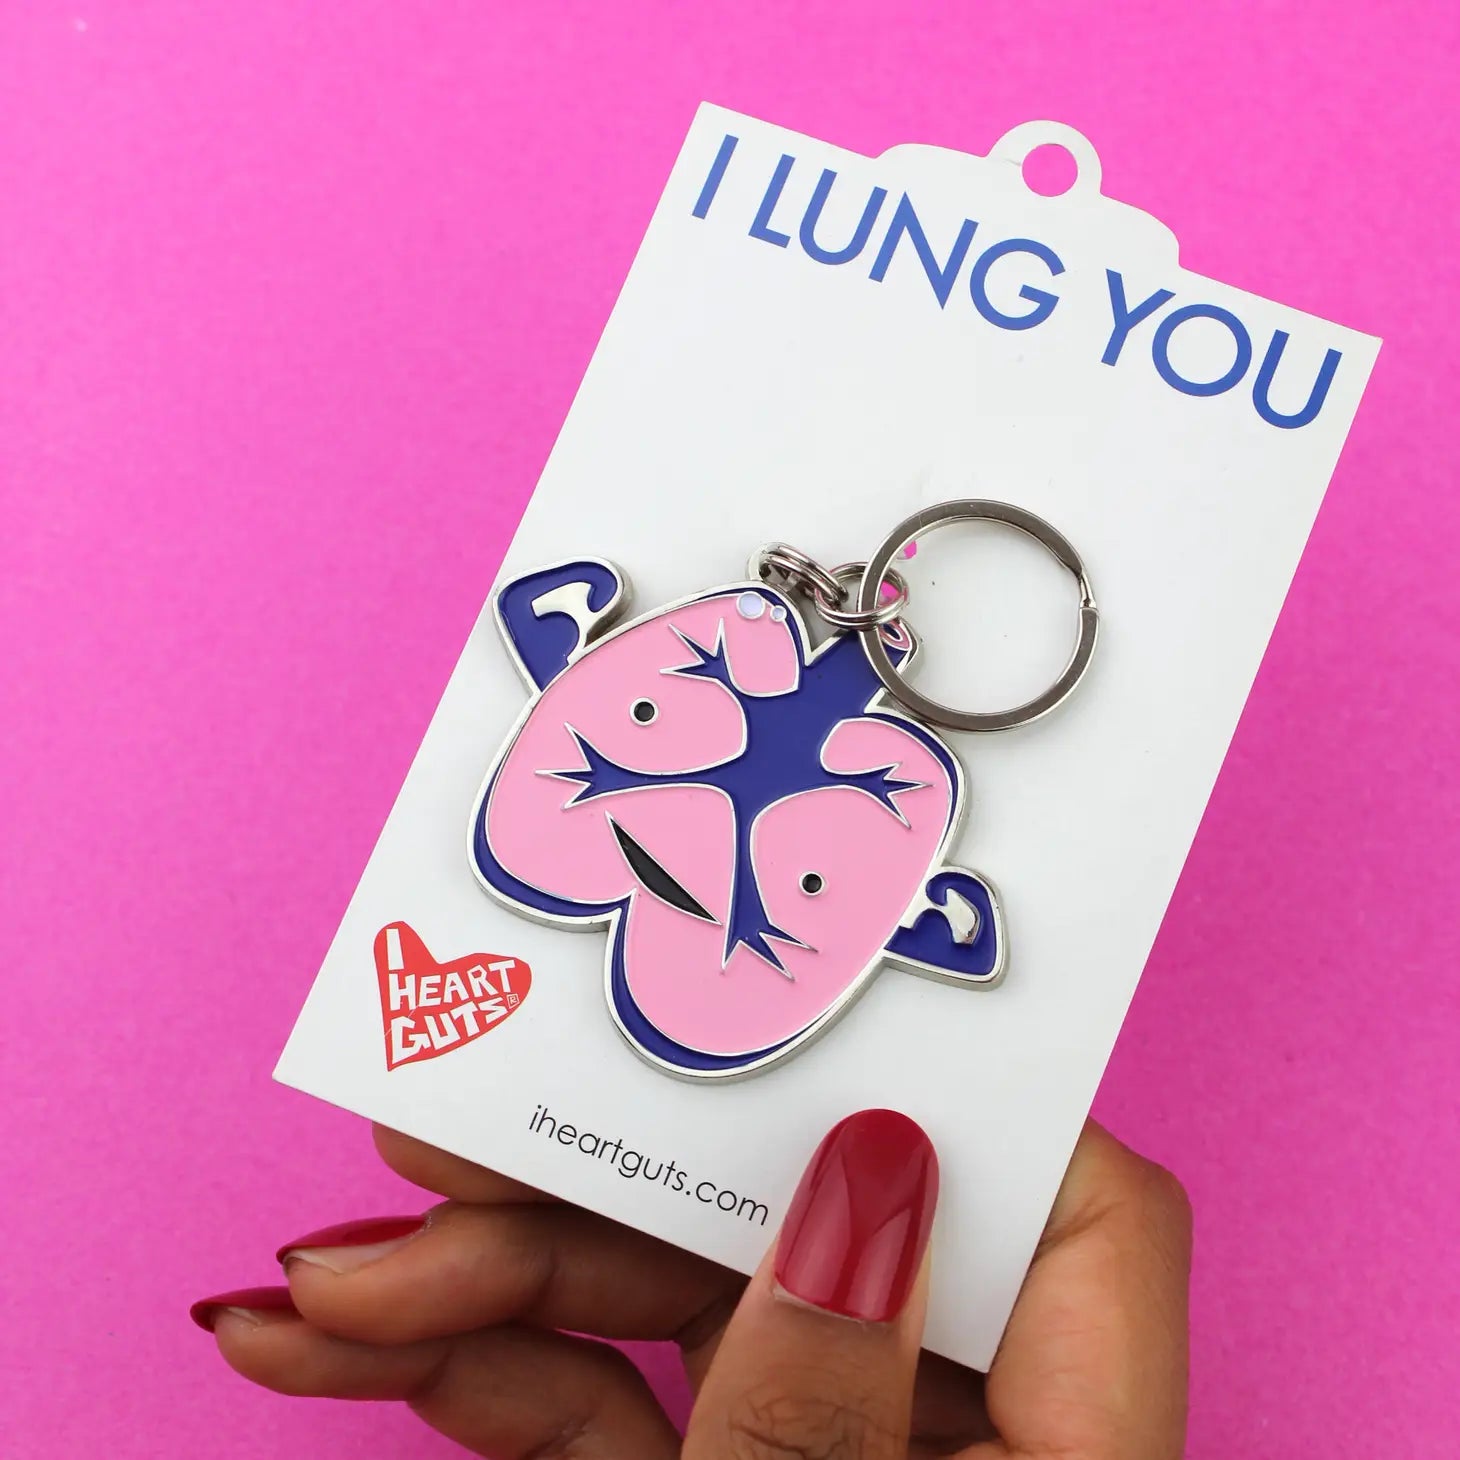 Keychain Lungs - I Lung You